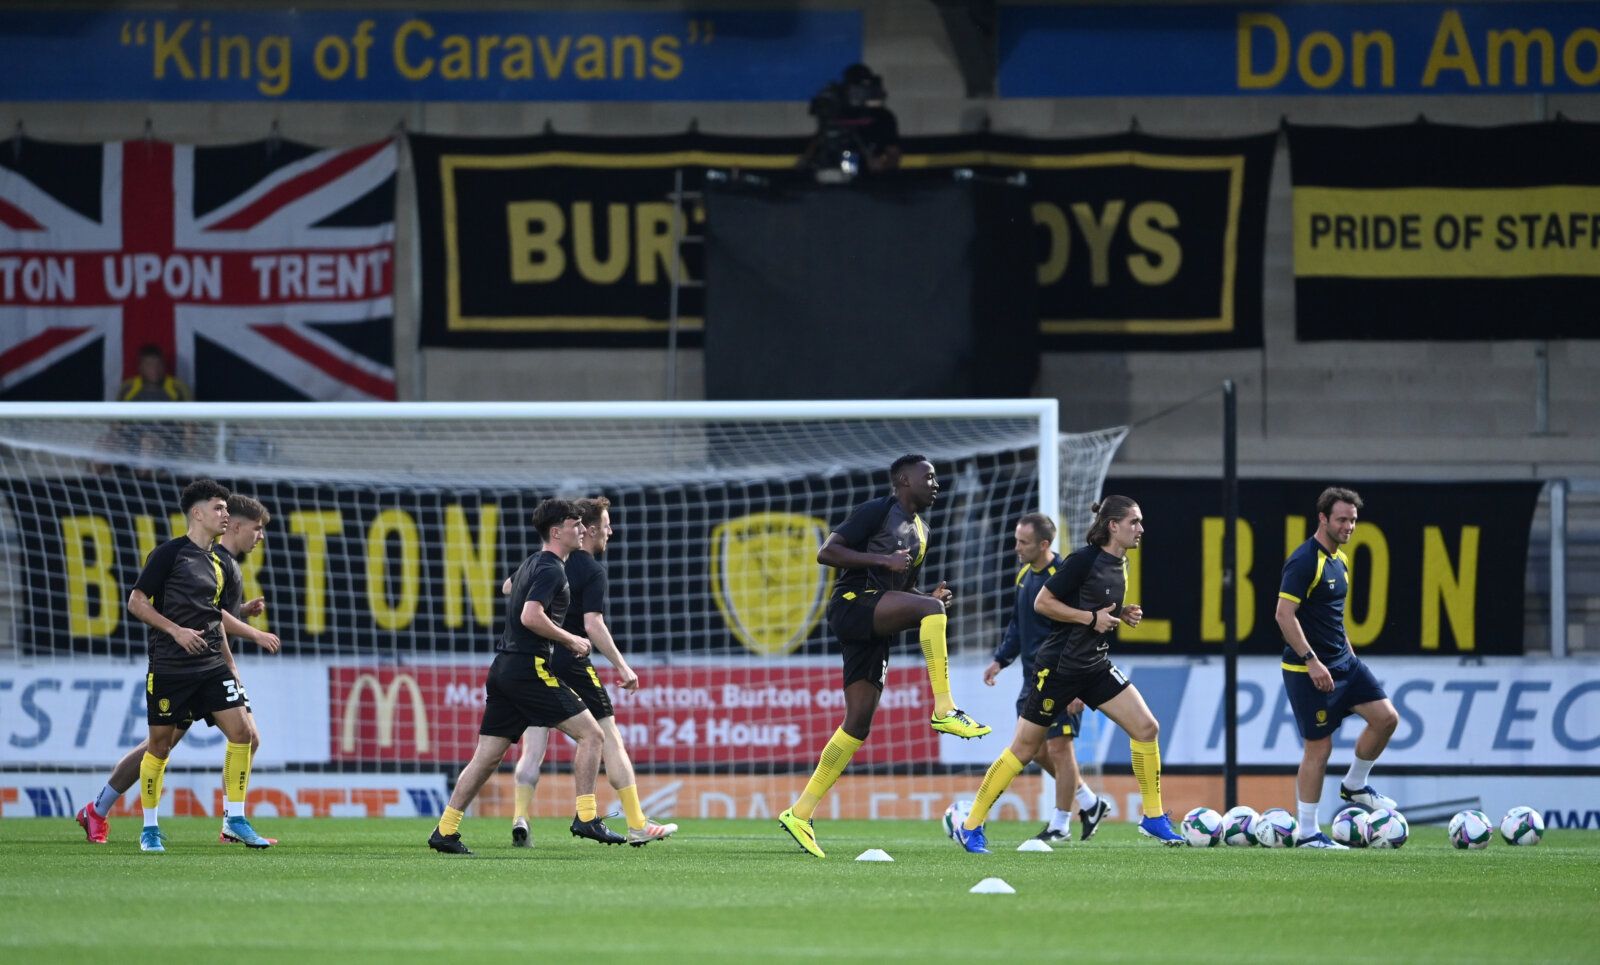 Soccer Football - Carabao Cup Second Round - Burton Albion v Aston Villa - Pirelli Stadium, Burton-on-Trent, Britain - September 15, 2020 Burton Albion's players during the warm up before the match Pool via REUTERS/Laurence Griffiths EDITORIAL USE ONLY. No use with unauthorized audio, video, data, fixture lists, club/league logos or 'live' services. Online in-match use limited to 75 images, no video emulation. No use in betting, games or single club/league/player publications.  Please contact yo